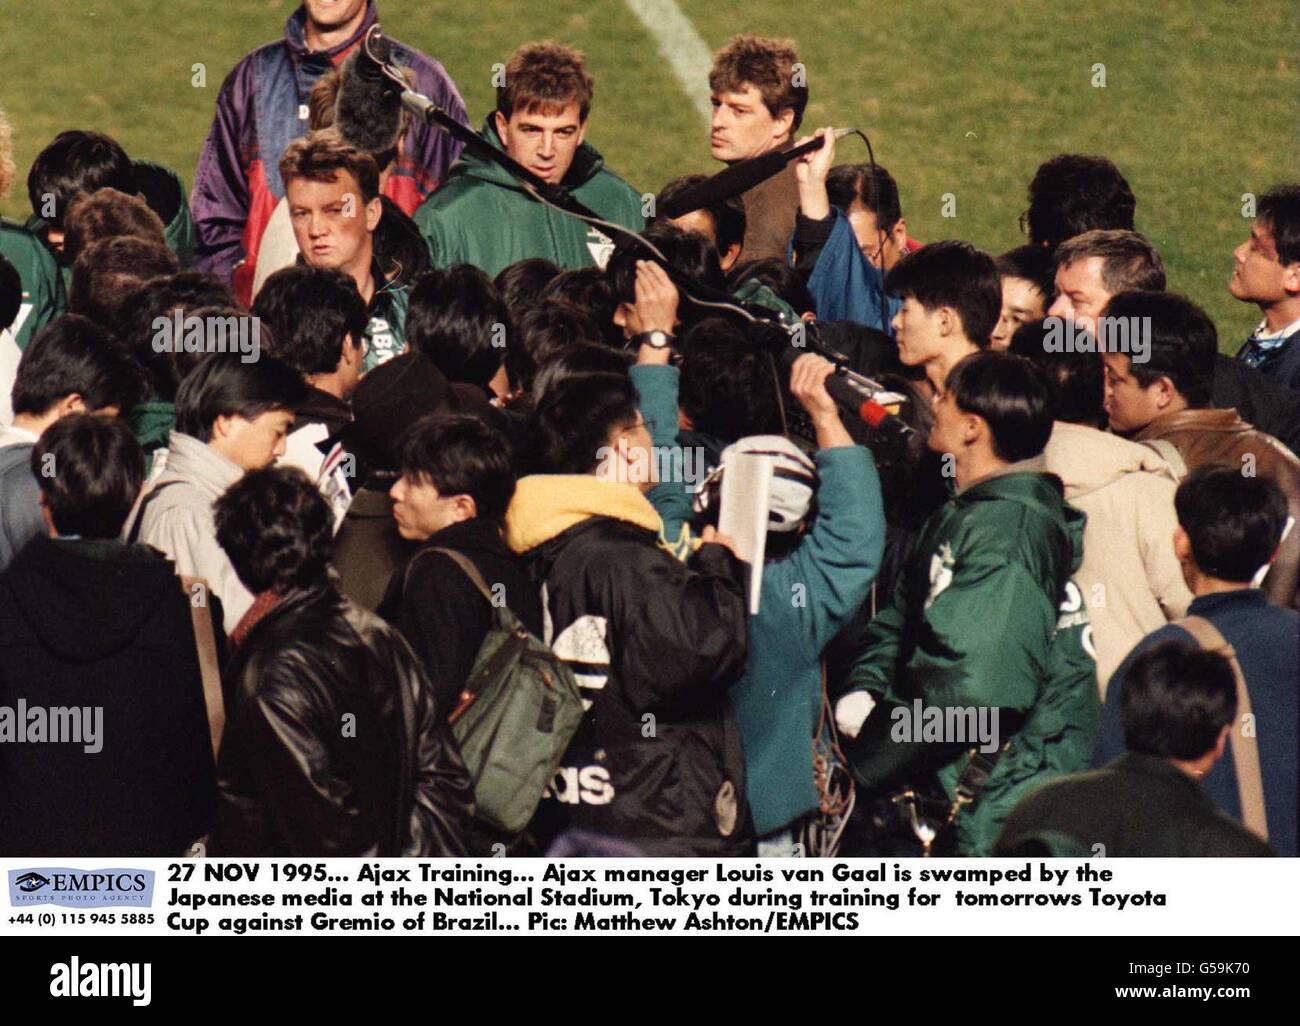 Ajax manager Louis van Gaal is swamped by the Japanese media at the National Stadium, Tokyo during training for tomorrows Toyota Cup Tokyo Stock Photo